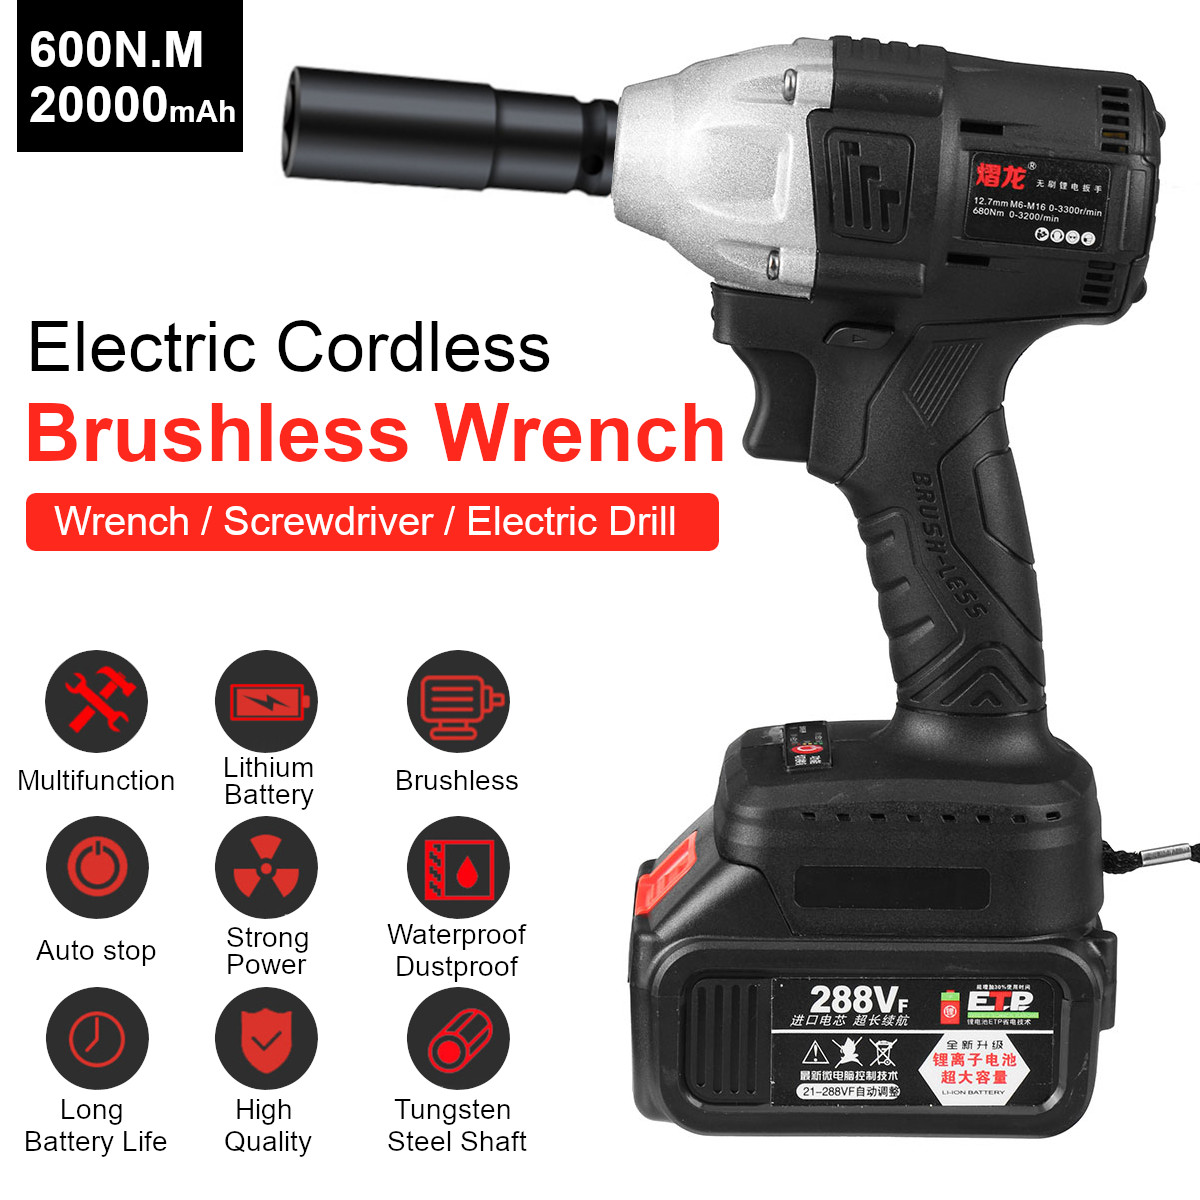 100-240V-21V-Cordless-Brushless-Electric-Wrench-600Nm-Impact-Wrench-20000mAh-Recharge-1790565-1